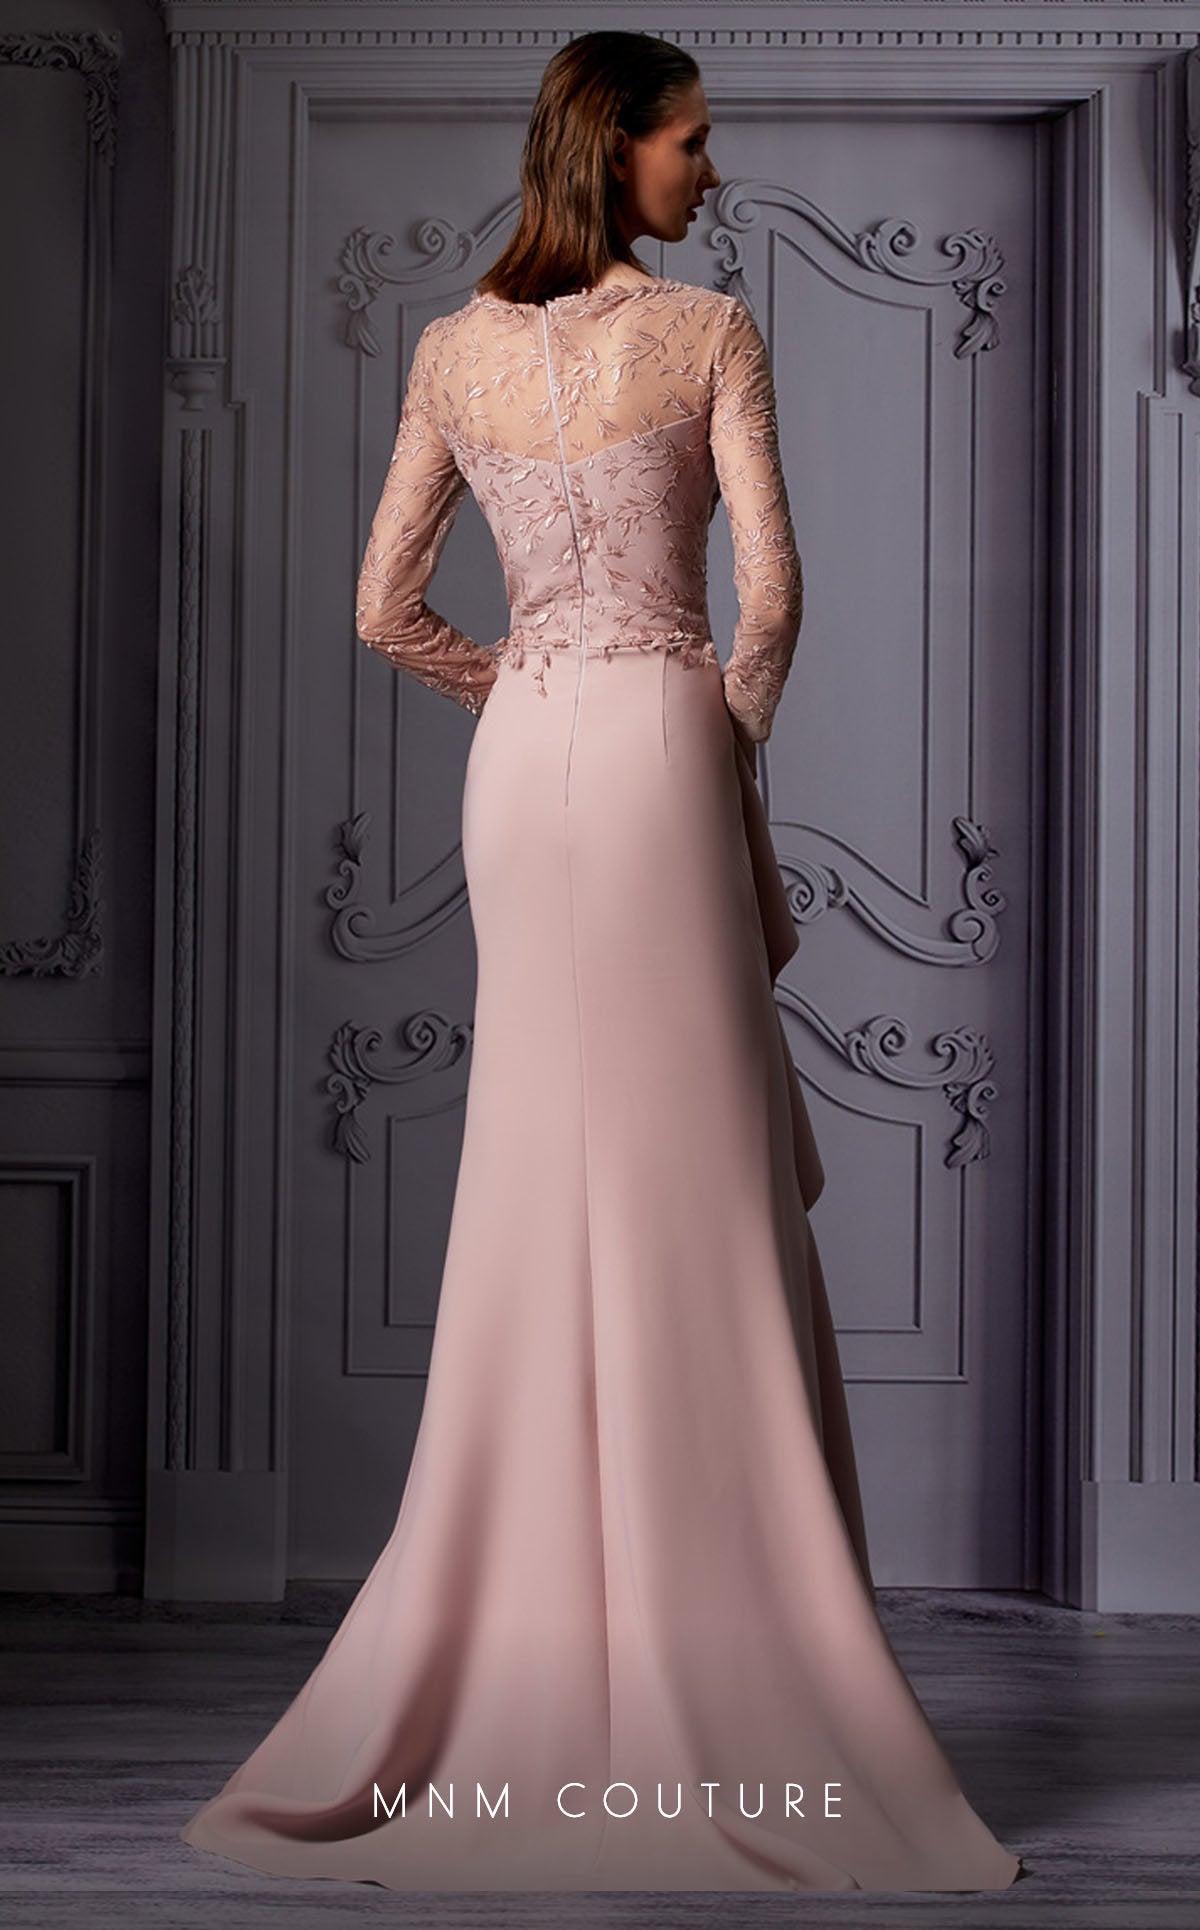 MNM-Couture-K3853-Dress-Marvelous-A-Line-Silhouette-Glittering-Accents-Back-View - Rofial Beauty